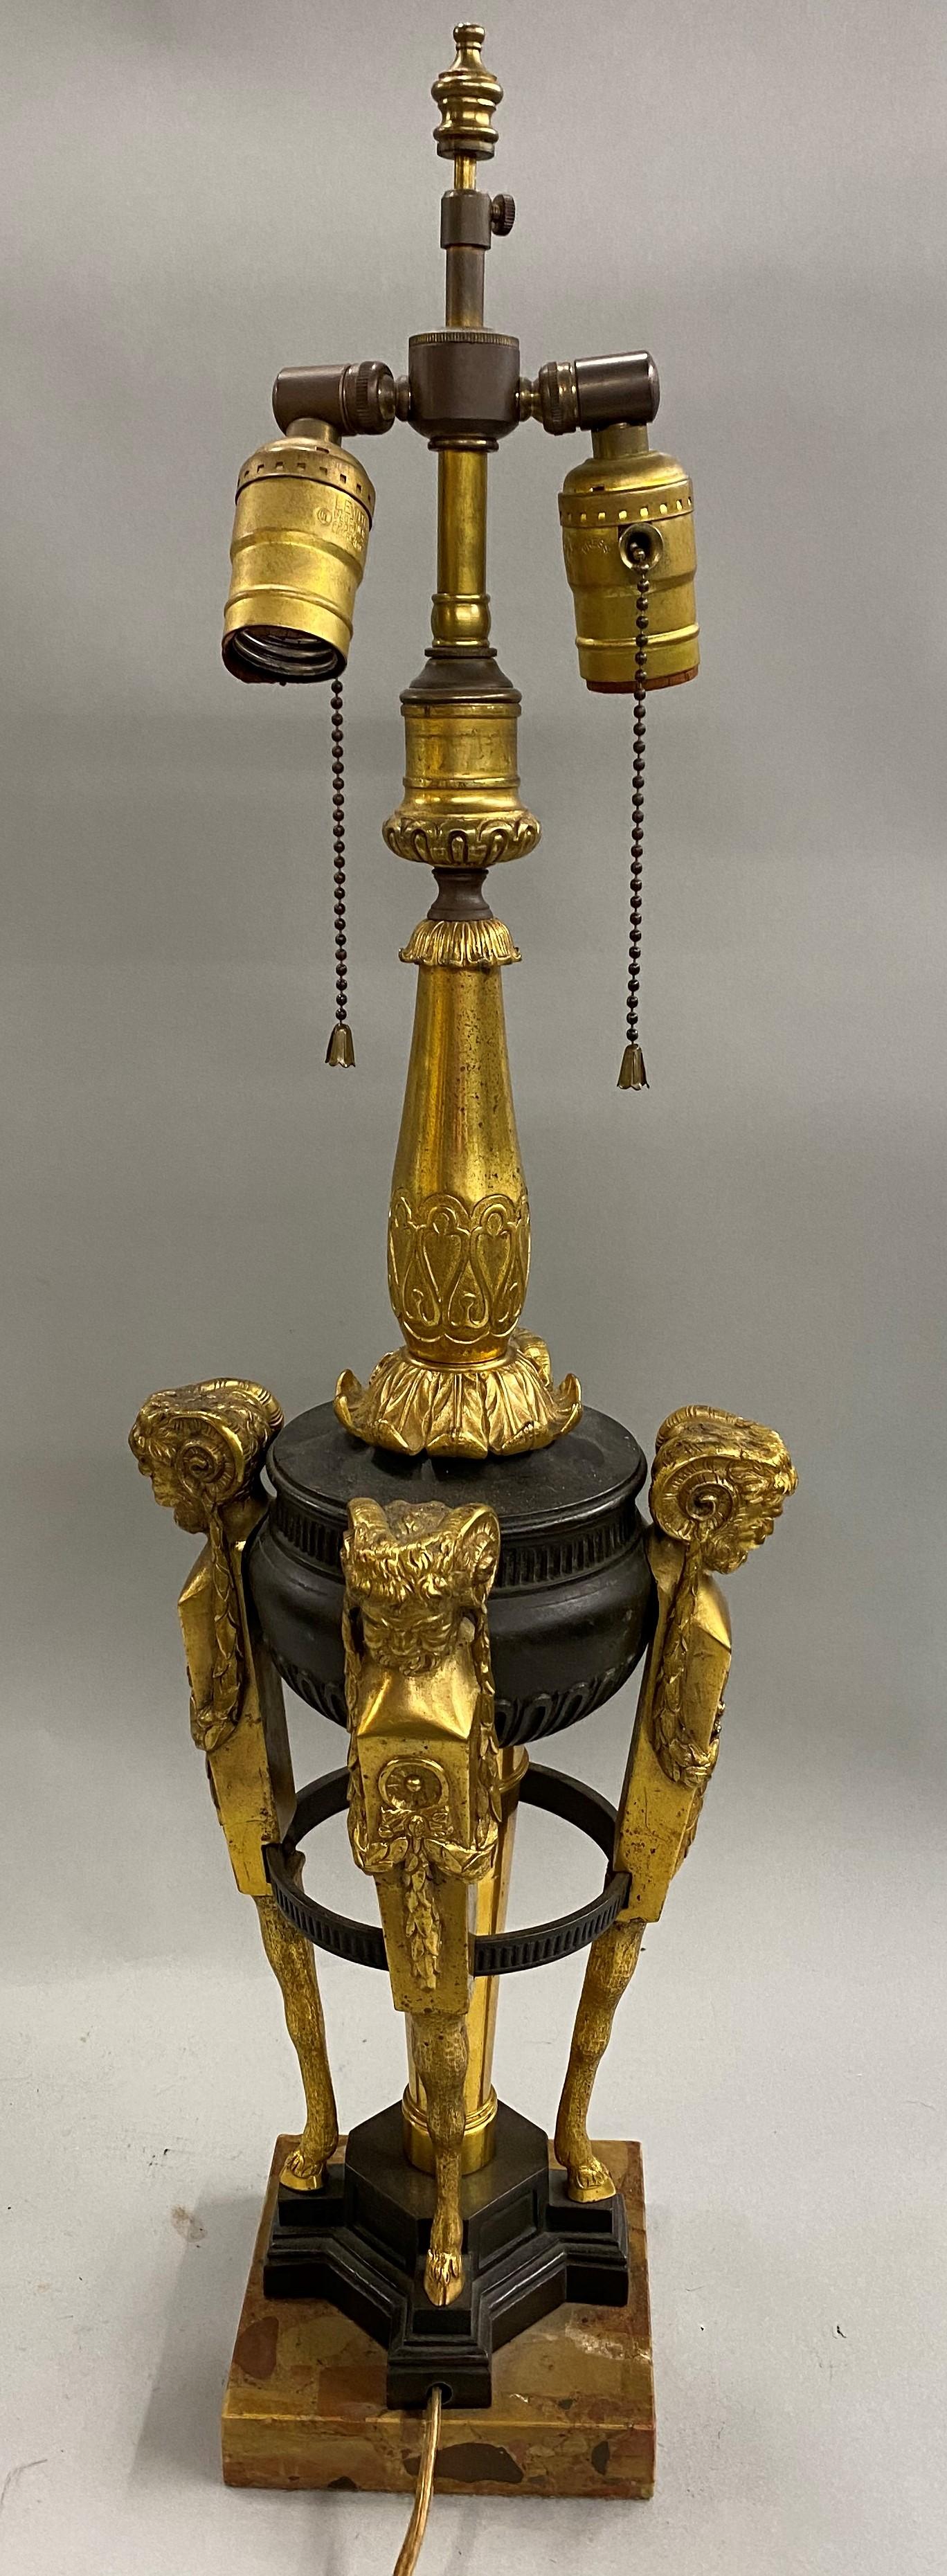 A fine quality EF Caldwell & Co bronze two light urn form table lamp with gilt foliate decorated stem and supported by four gilt bronze Bacchanalian figures with single hooves, all mounted on a marble base, unsigned, circa 1900, in very good overall